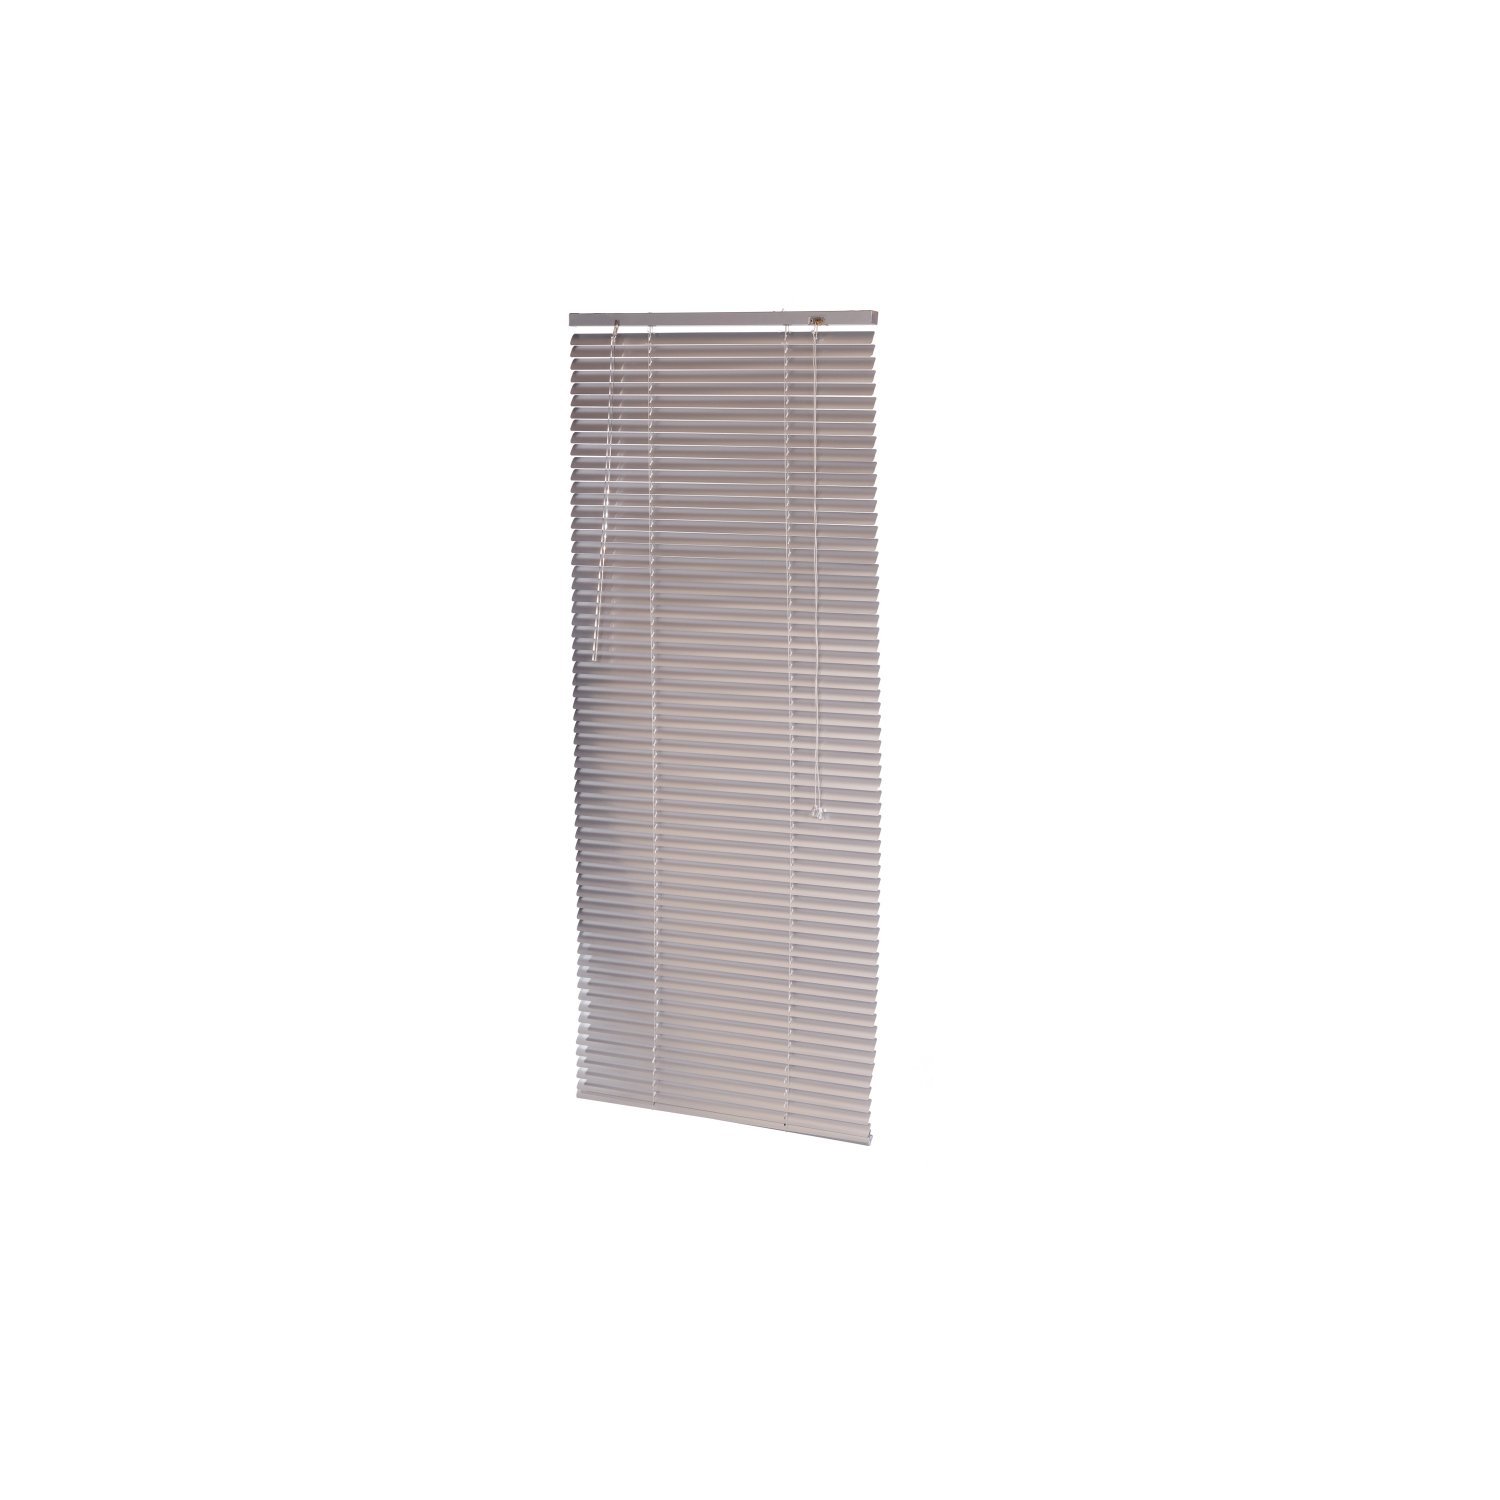 60 x 150cm Aluminium Silver Home Office Venetian Window Blinds with Fixings